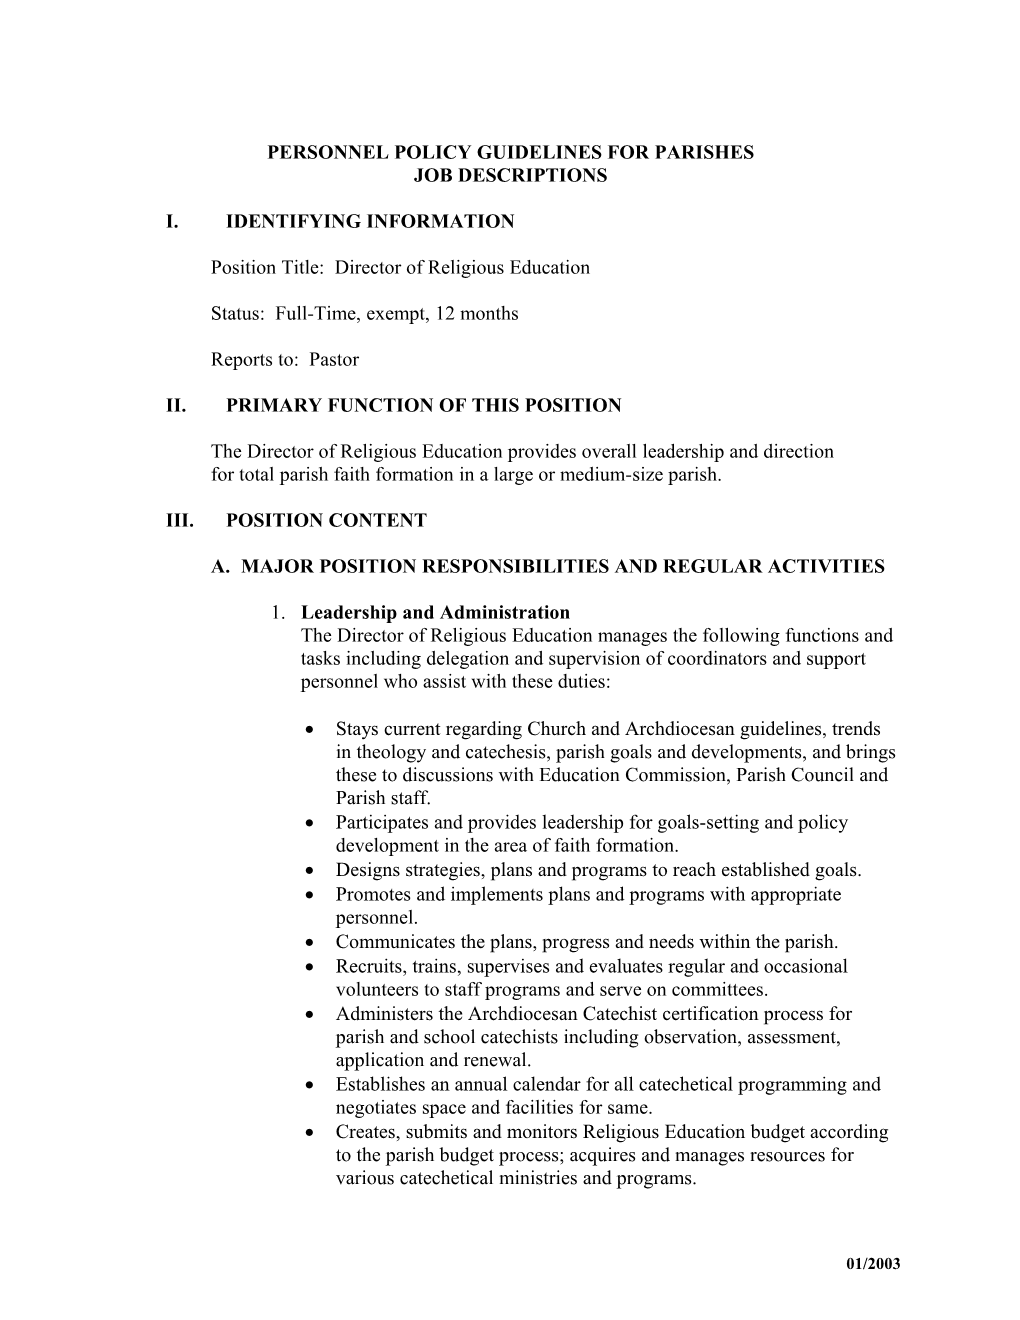 Personnel Policy Guidelines for Parishes Job Descriptions